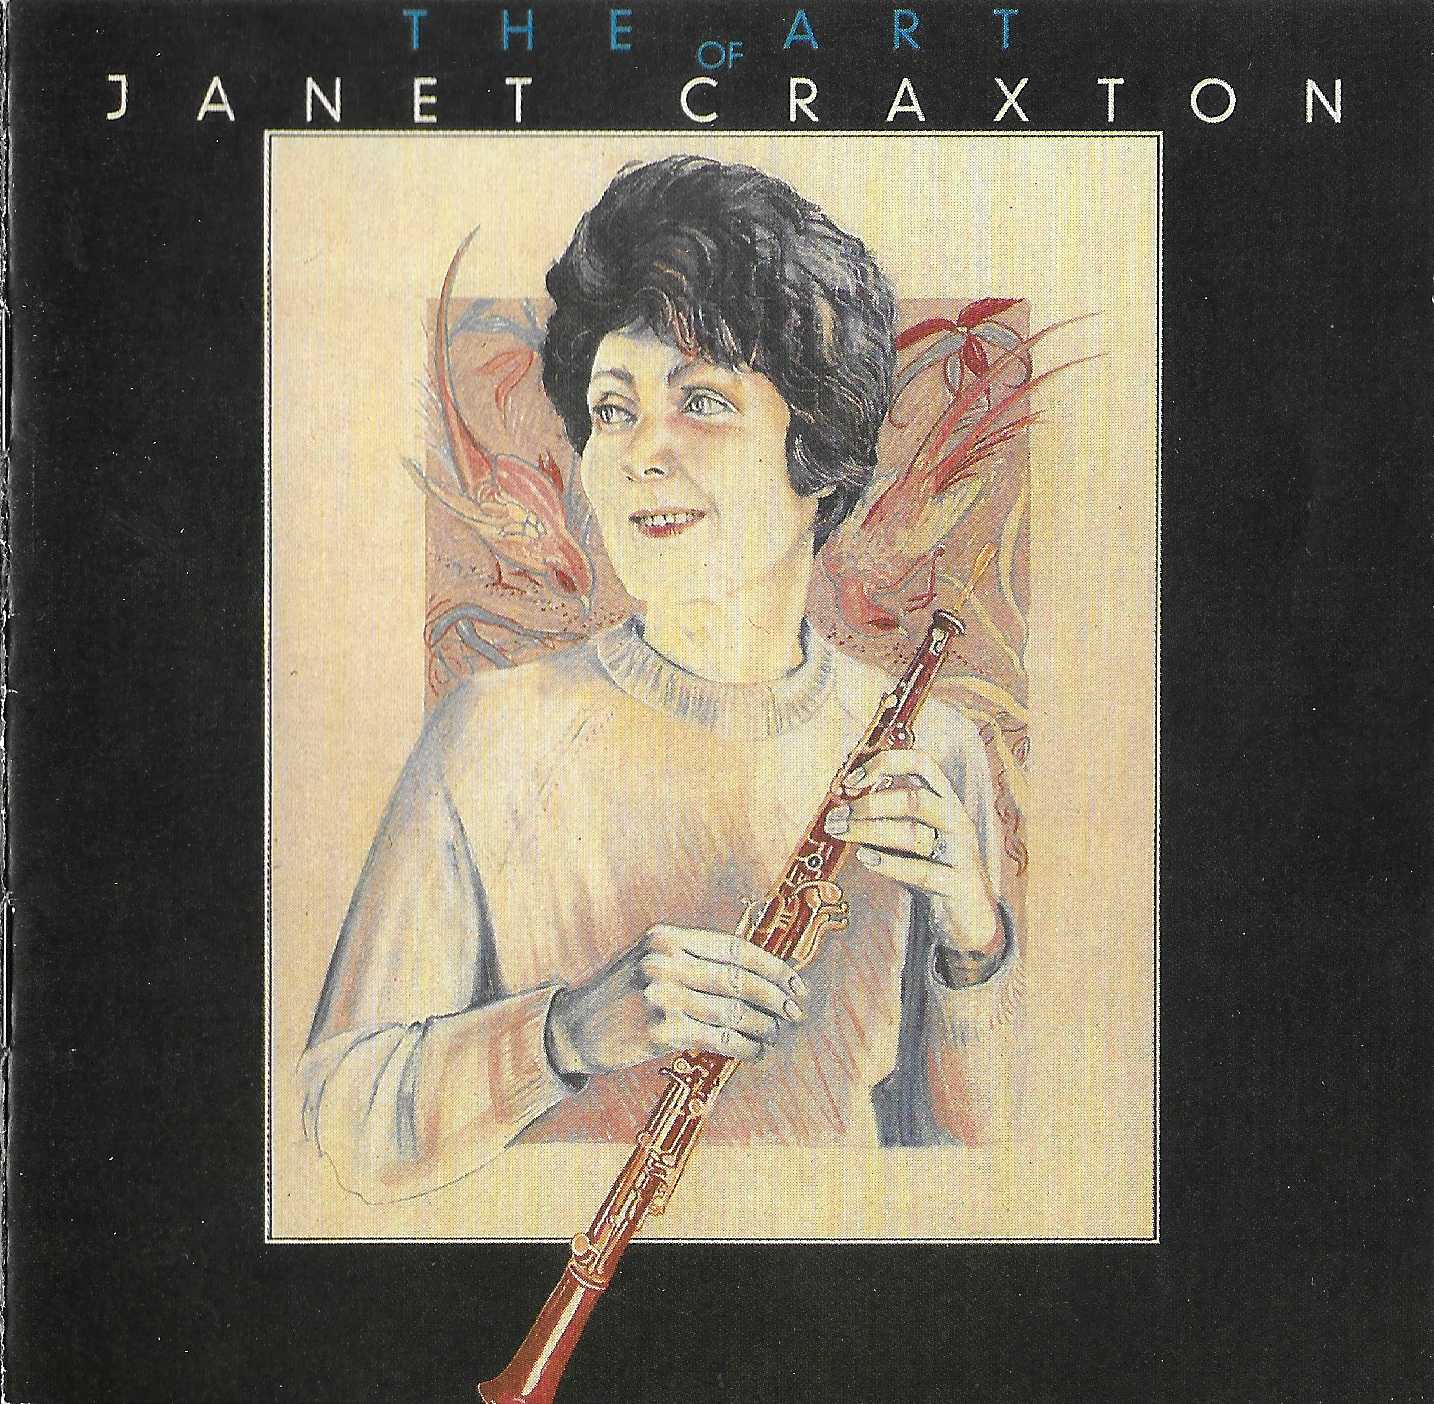 Picture of BBCCD635 The art of Janet Craxton by artist Janet Craxton from the BBC records and Tapes library